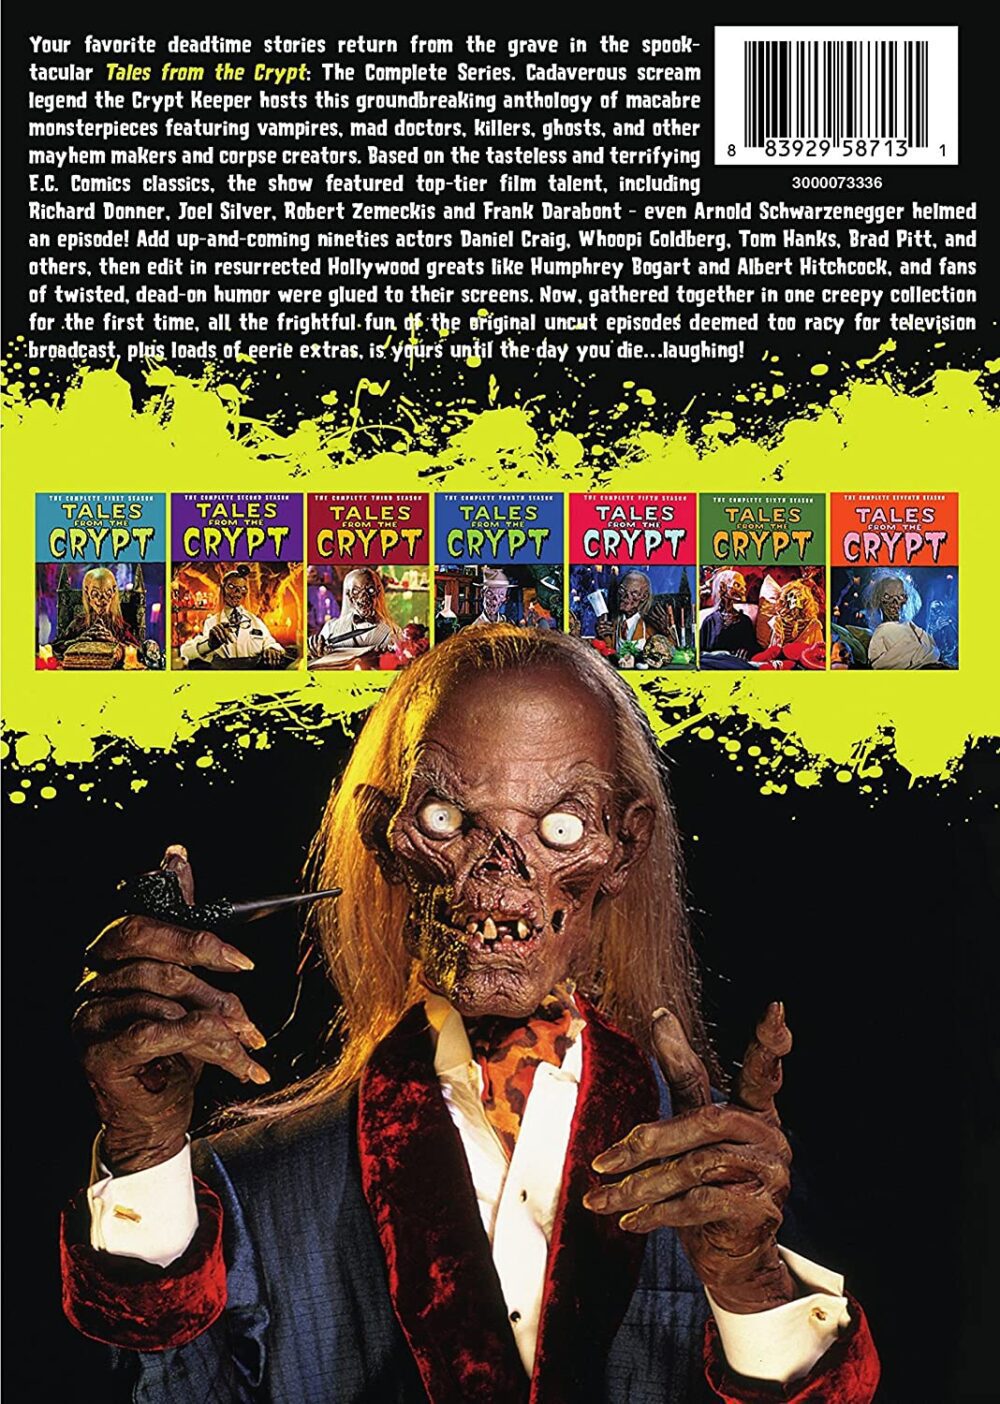 Tales from the Crypt: The Complete Series DVD Box Set